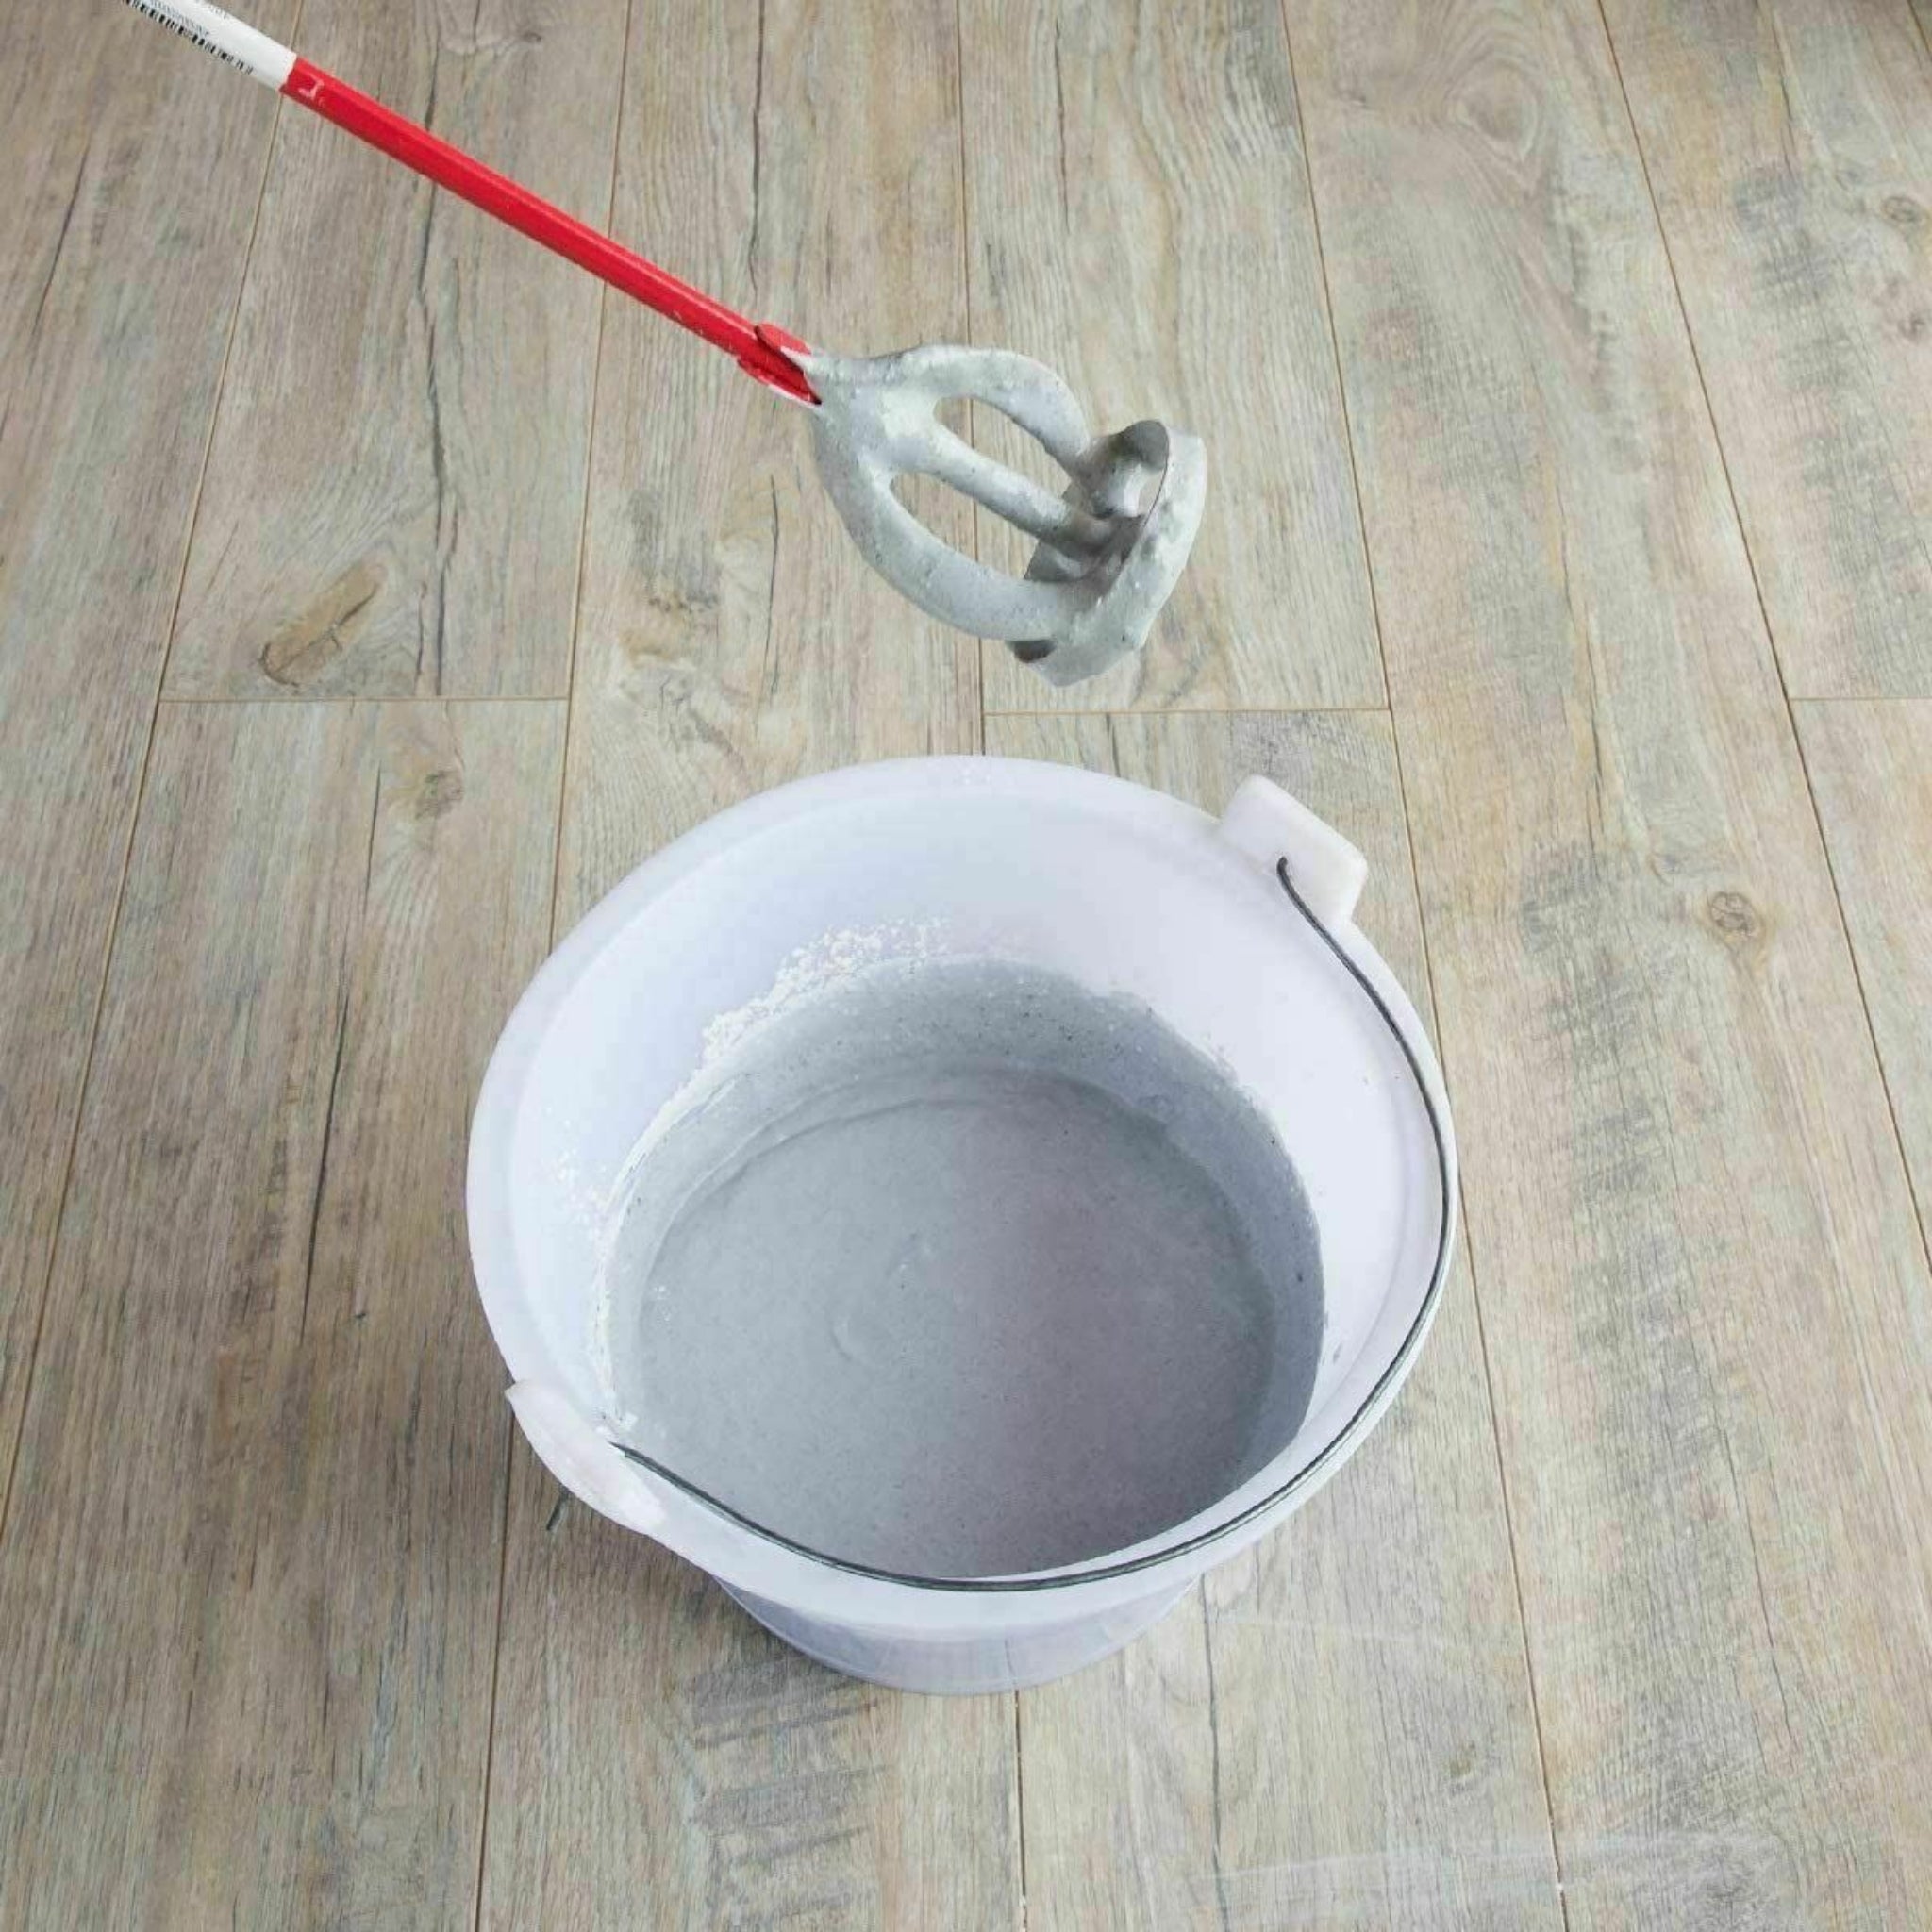 Beclen Harp Red Drill Paint/Cement Pot Plaster Mixer/Stirrer/Mixing Paddle Whisk Tool HEX